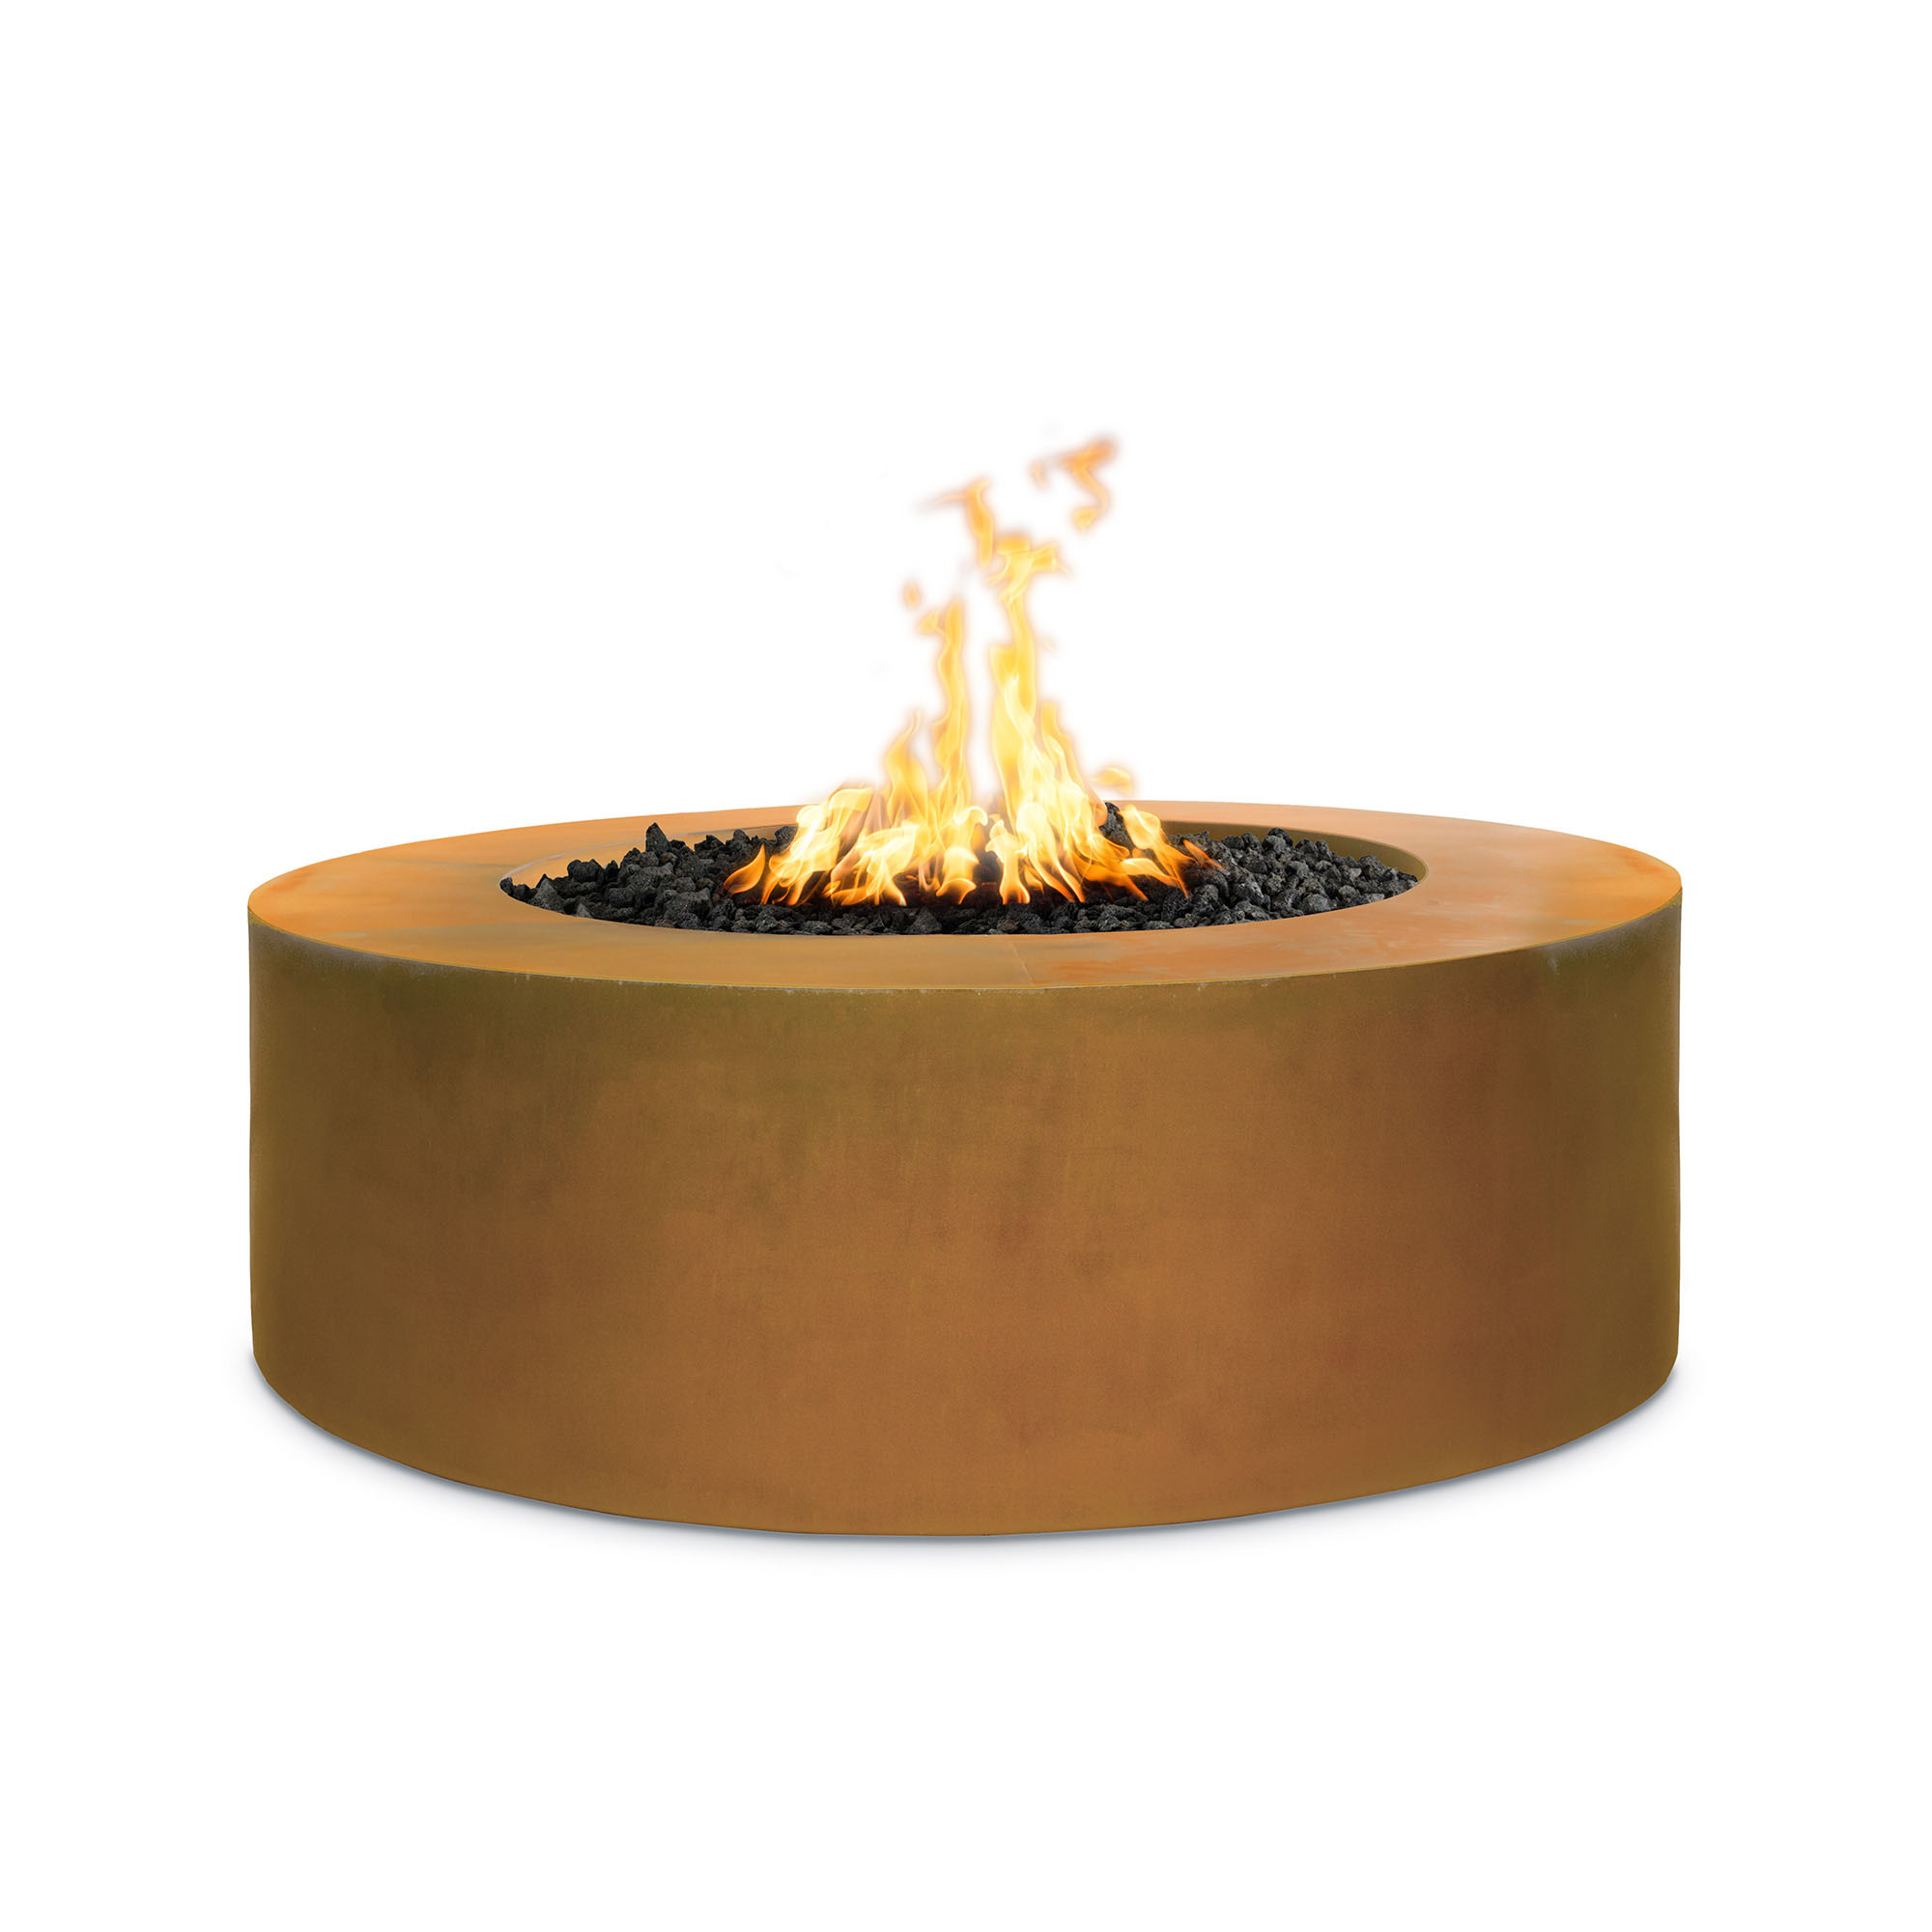 Unity Corten Steel Fire Pit The Outdoor Plus 48, 60 and 72 inch (TOP Ignition Options: Match Lit Ignition, Unity Sizes: 48 X 18 inches)